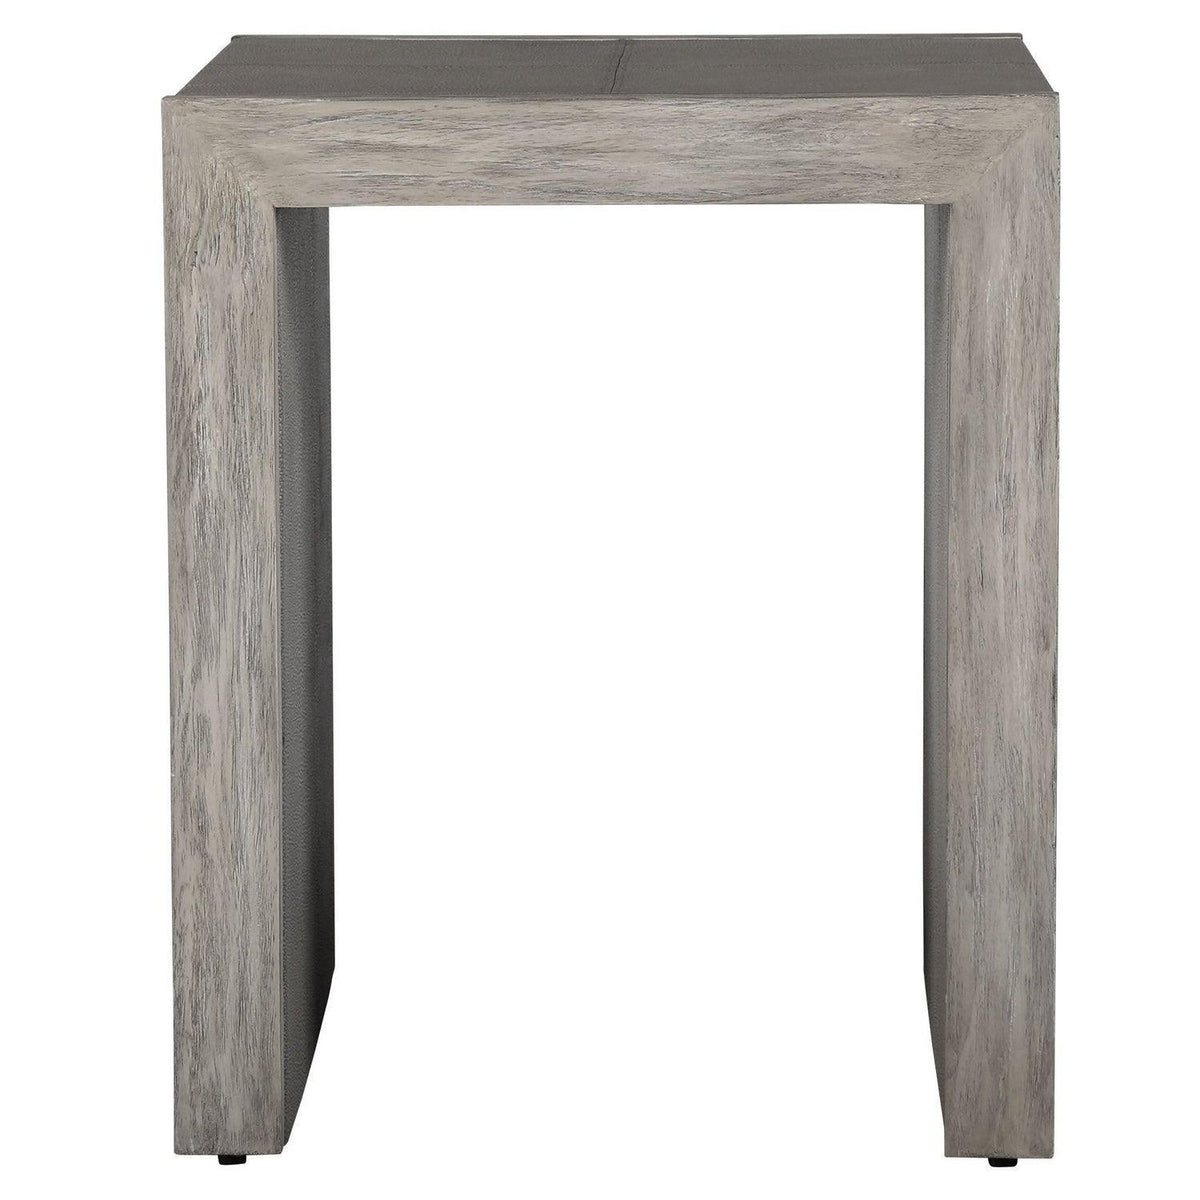 The Uttermost - Aerina End Table - 25214 | Montreal Lighting & Hardware